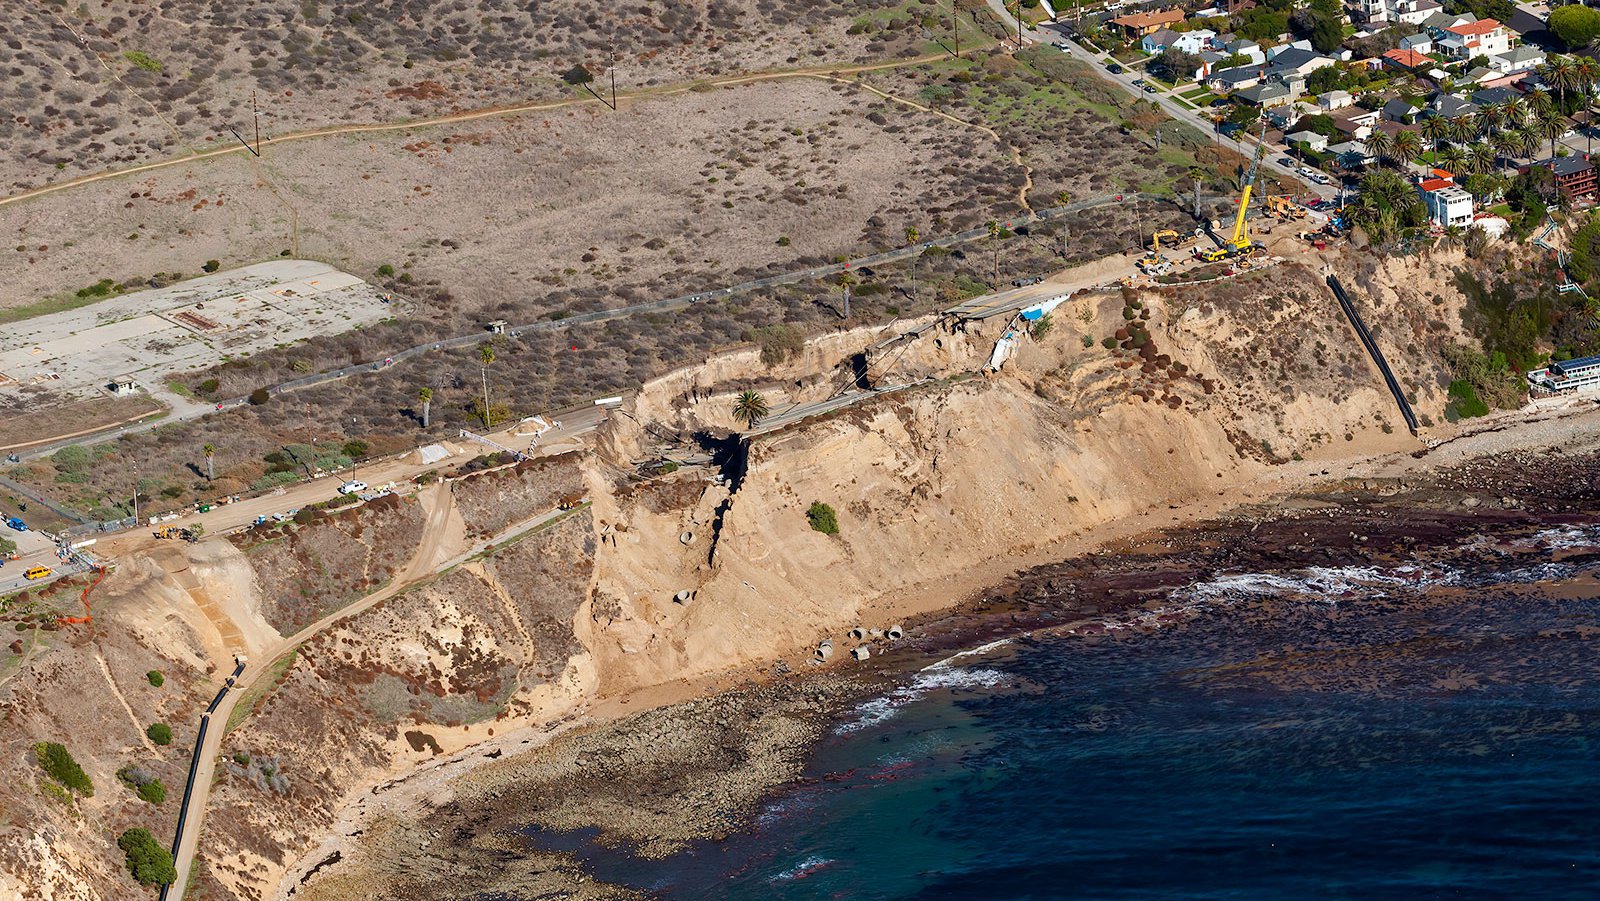 Blog photo of the San Pedro Landslide, where Paseo del Mar fell into the ocean in between San Pedro and Palos Verdes